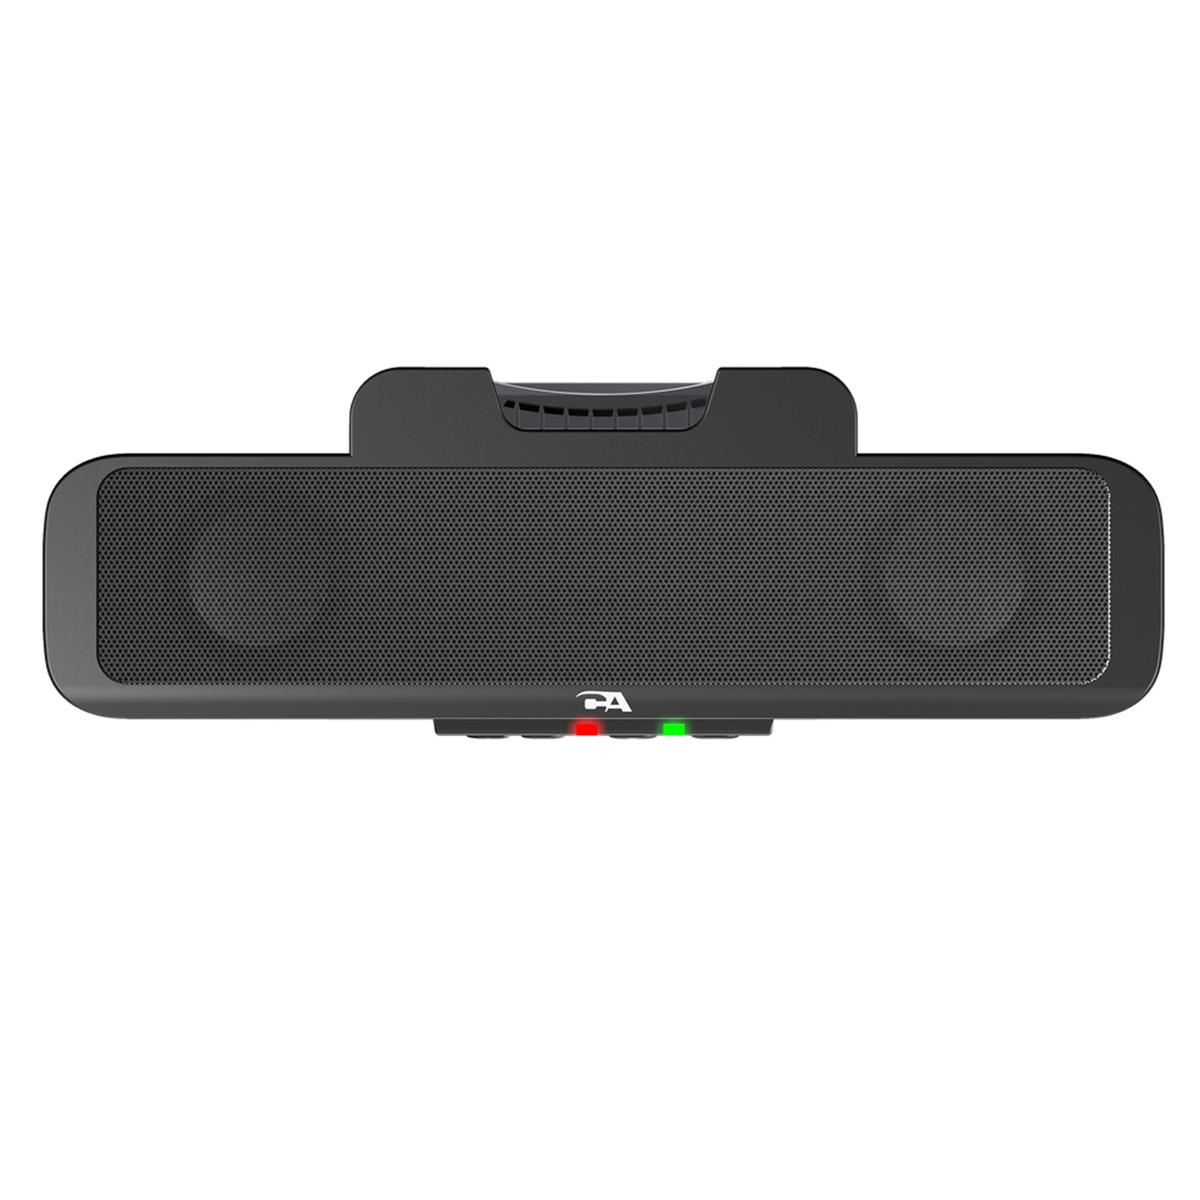 Image of Cyber Acoustics CA-2890 Compact USB Speaker Bar with Integrated Monitor Mount